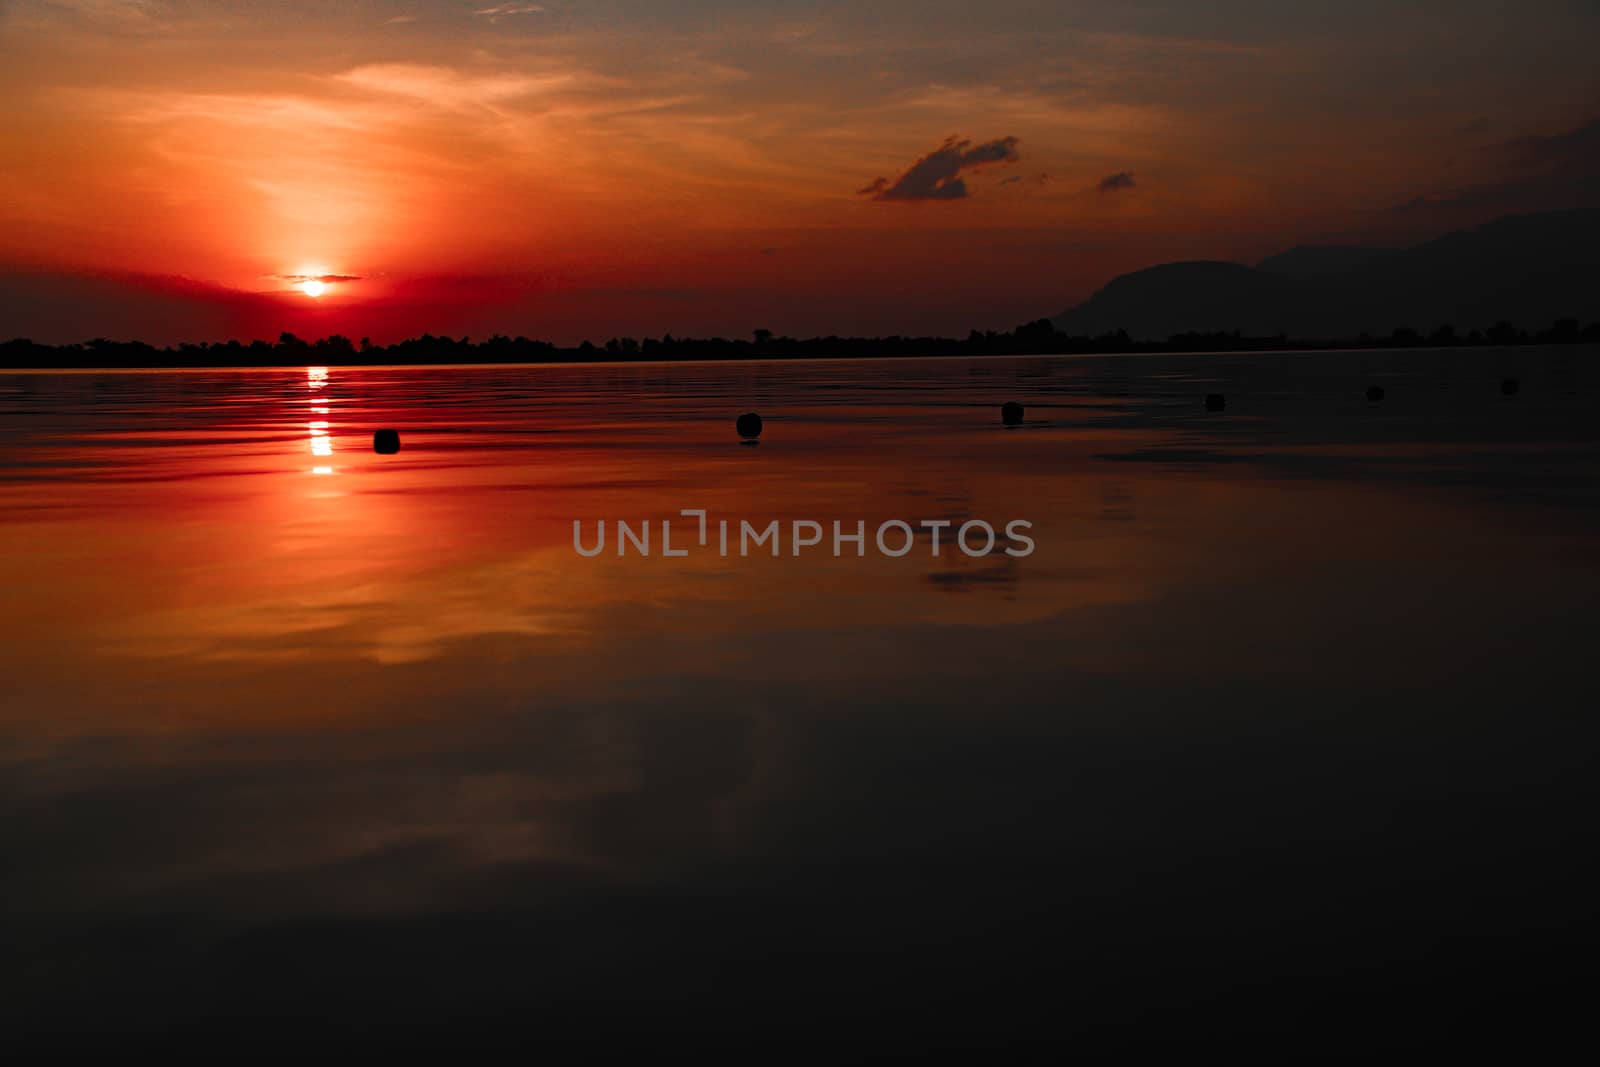 Cinematic red sunset sky reflected on the still waters of the Mekong River during the hot and humid summer season in Cambodia